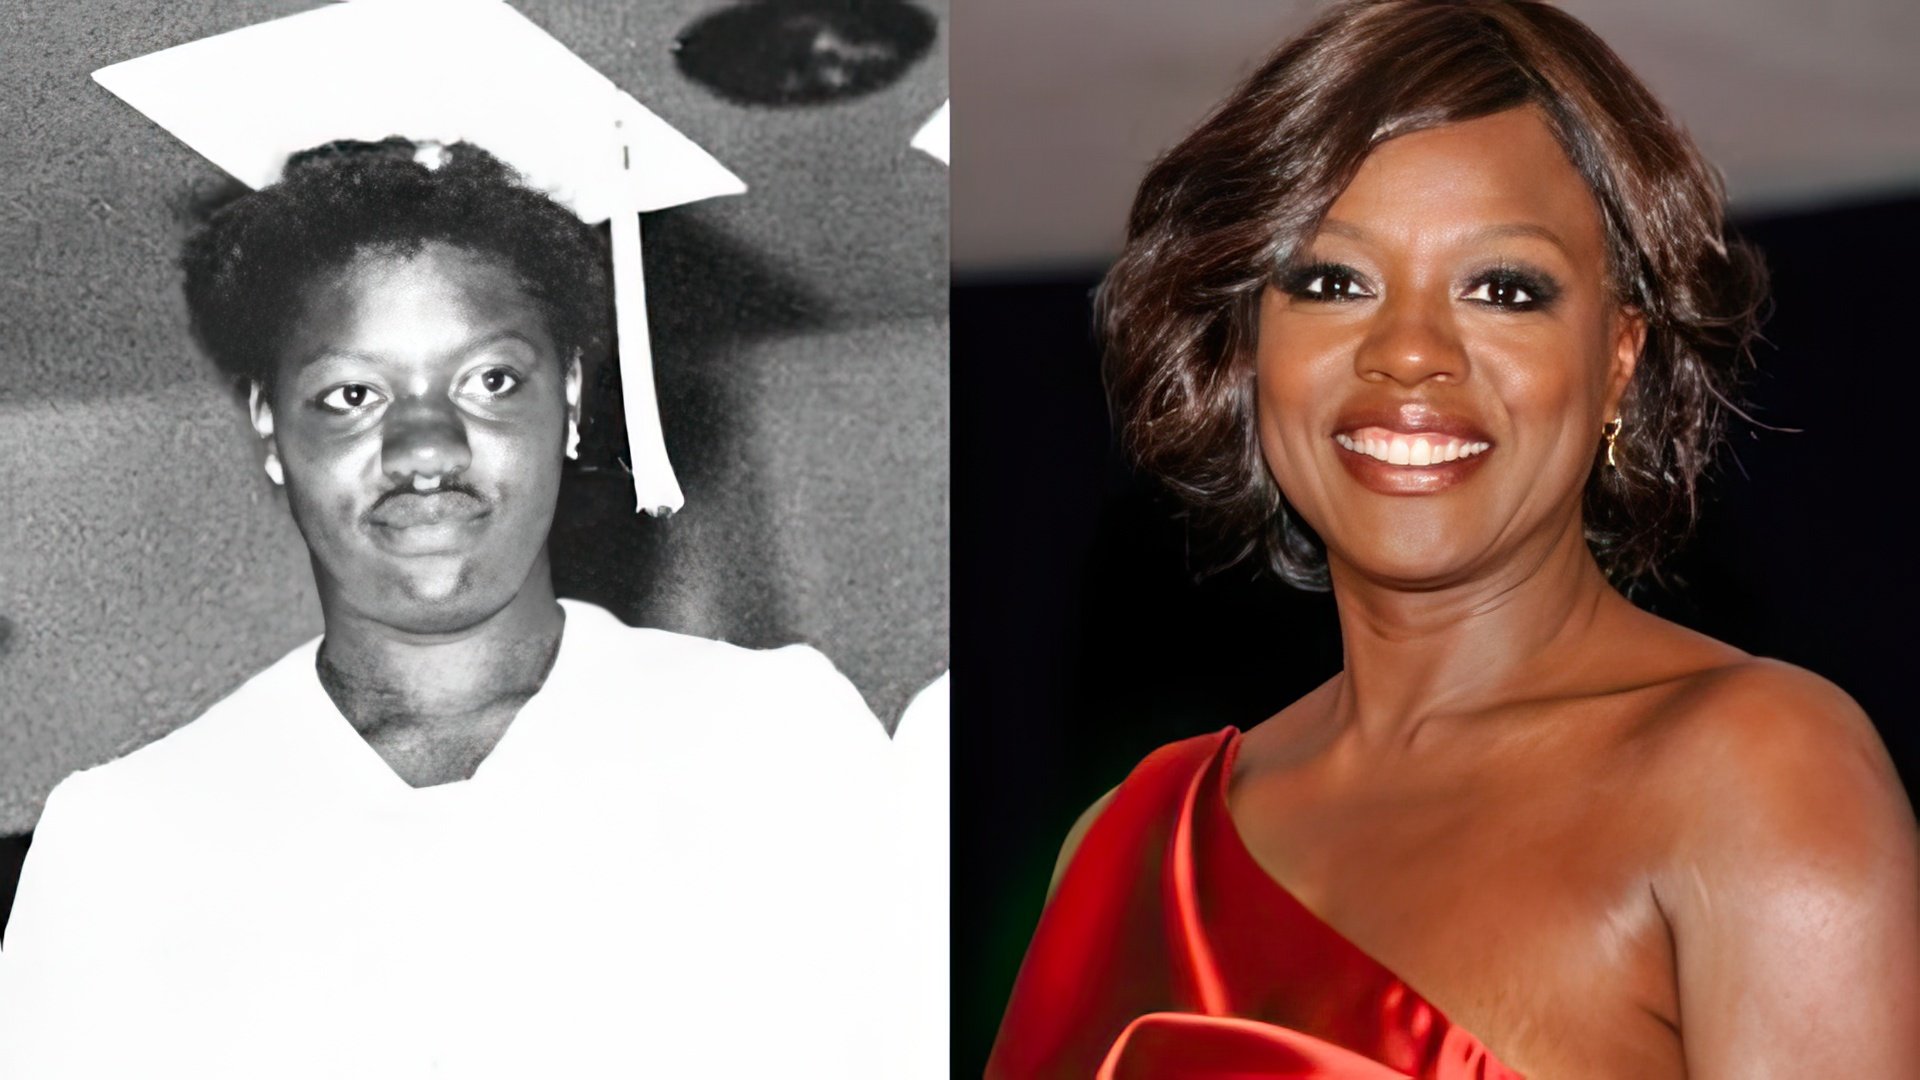 Viola Davis in her youth and now